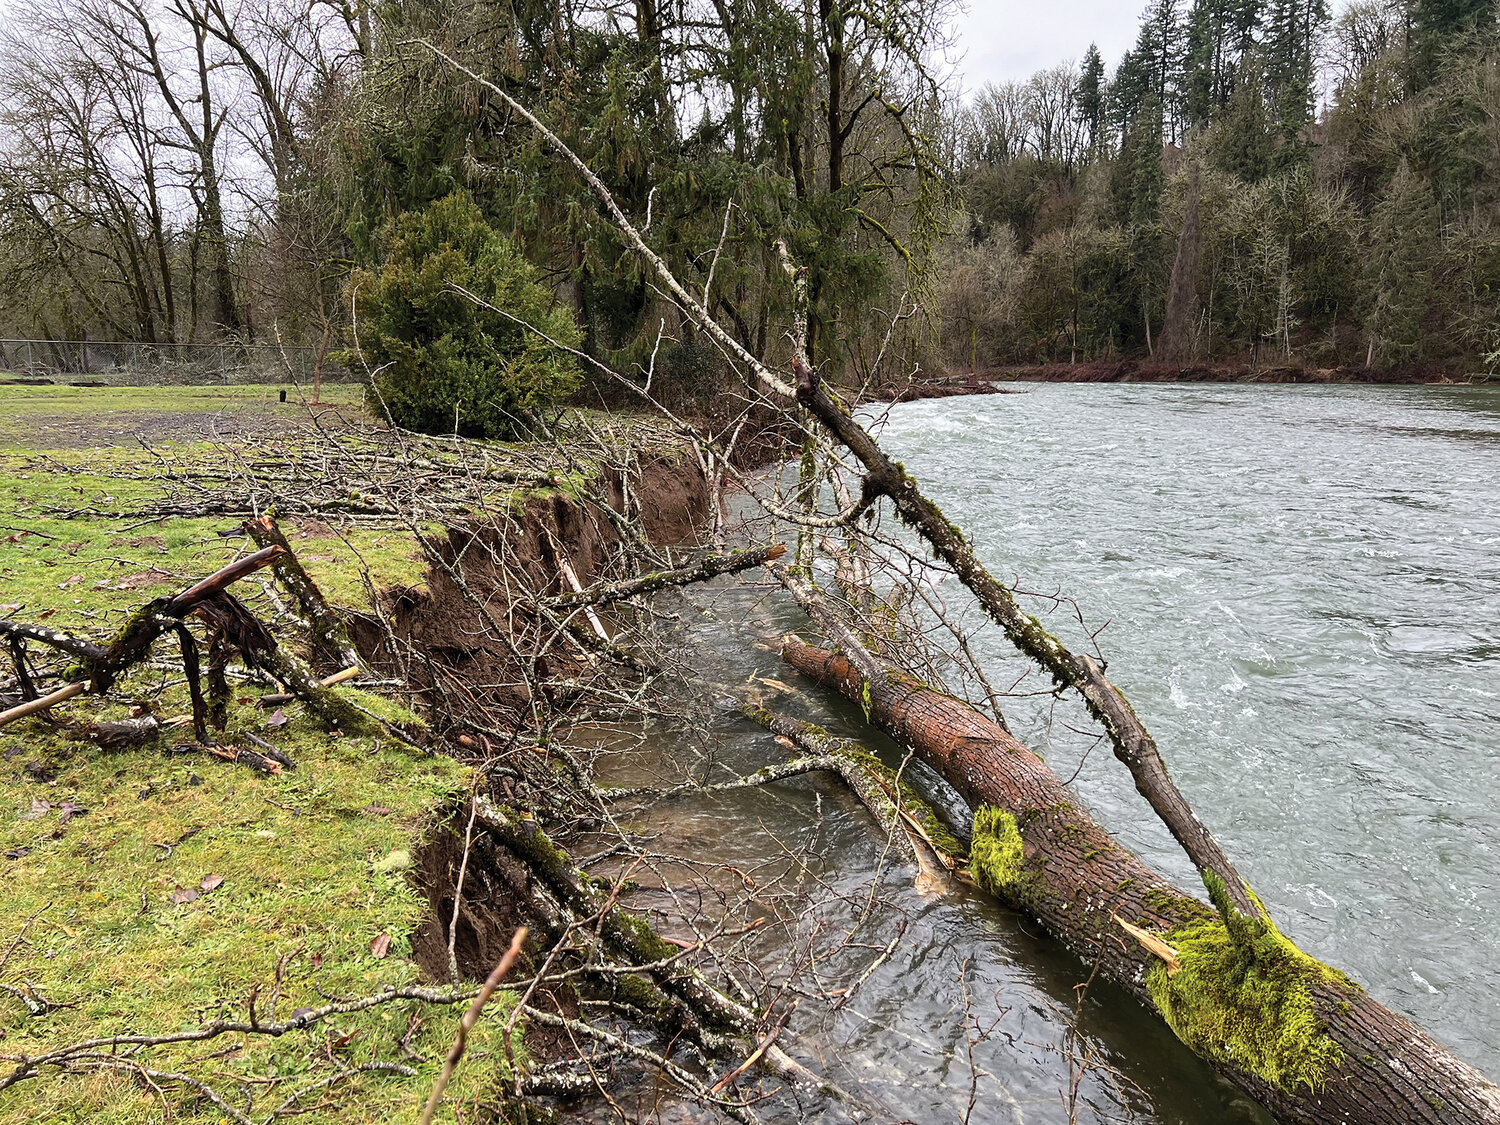 A fallen cottonwood tree and an eroding riverbank are seen along the East Fork Lewis River at Daybreak Regional Park, which has prompted sections of the park to close.